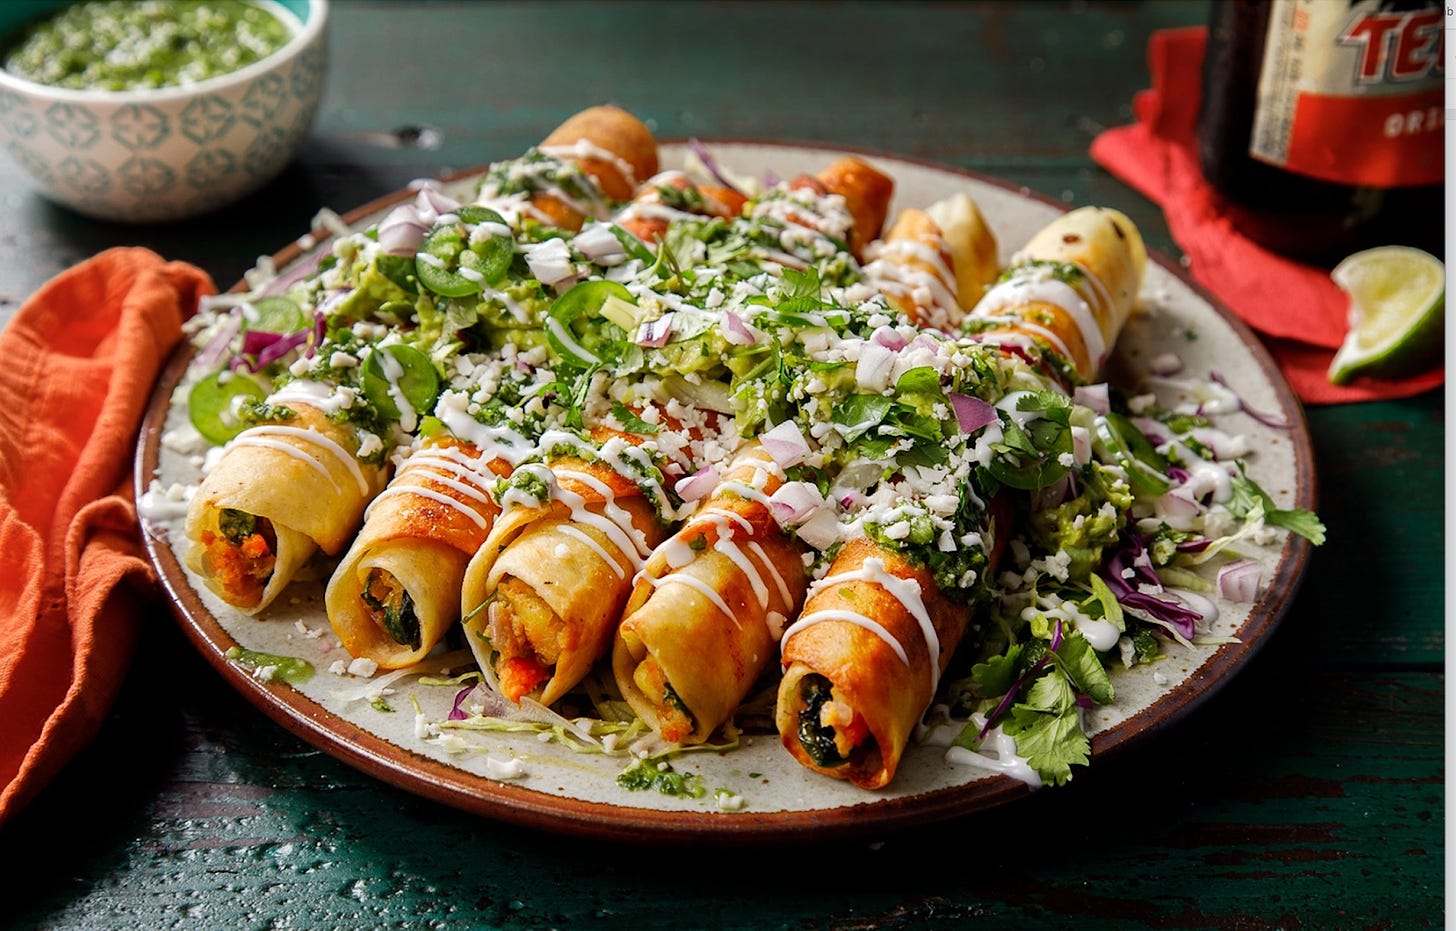 rolled tacos anyone?